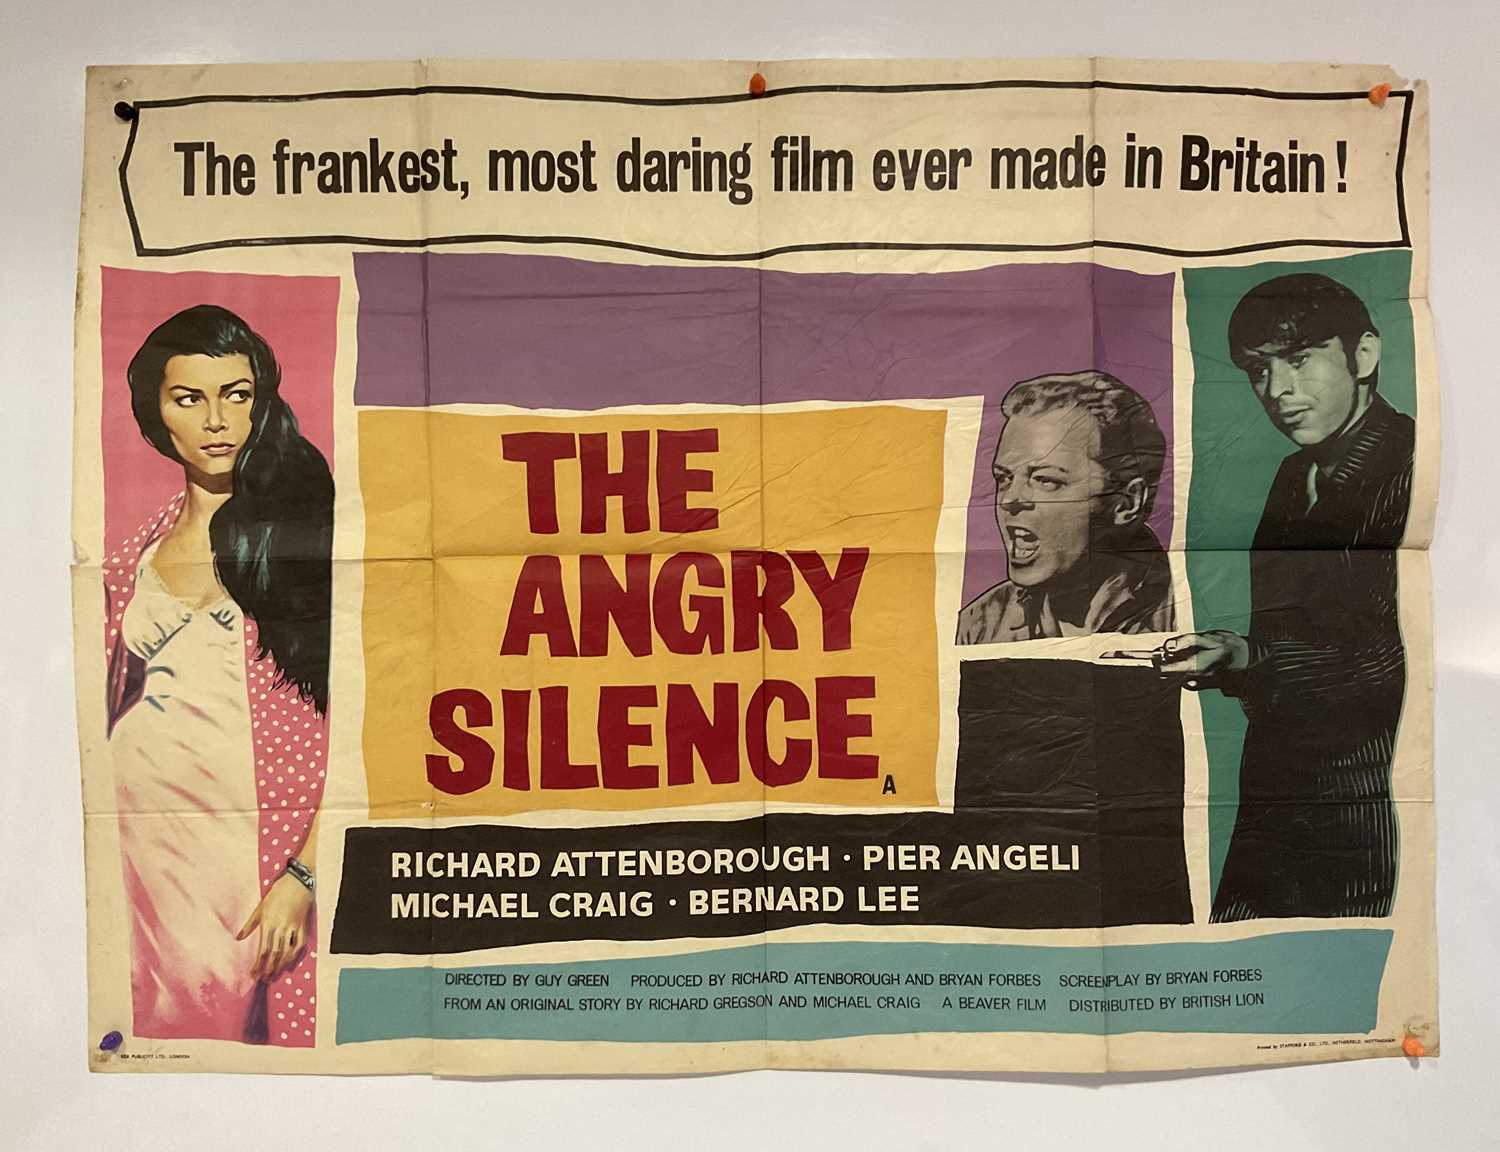 Lot 2 - THE ANGRY SILENCE (1960) - UK Quad film poster...